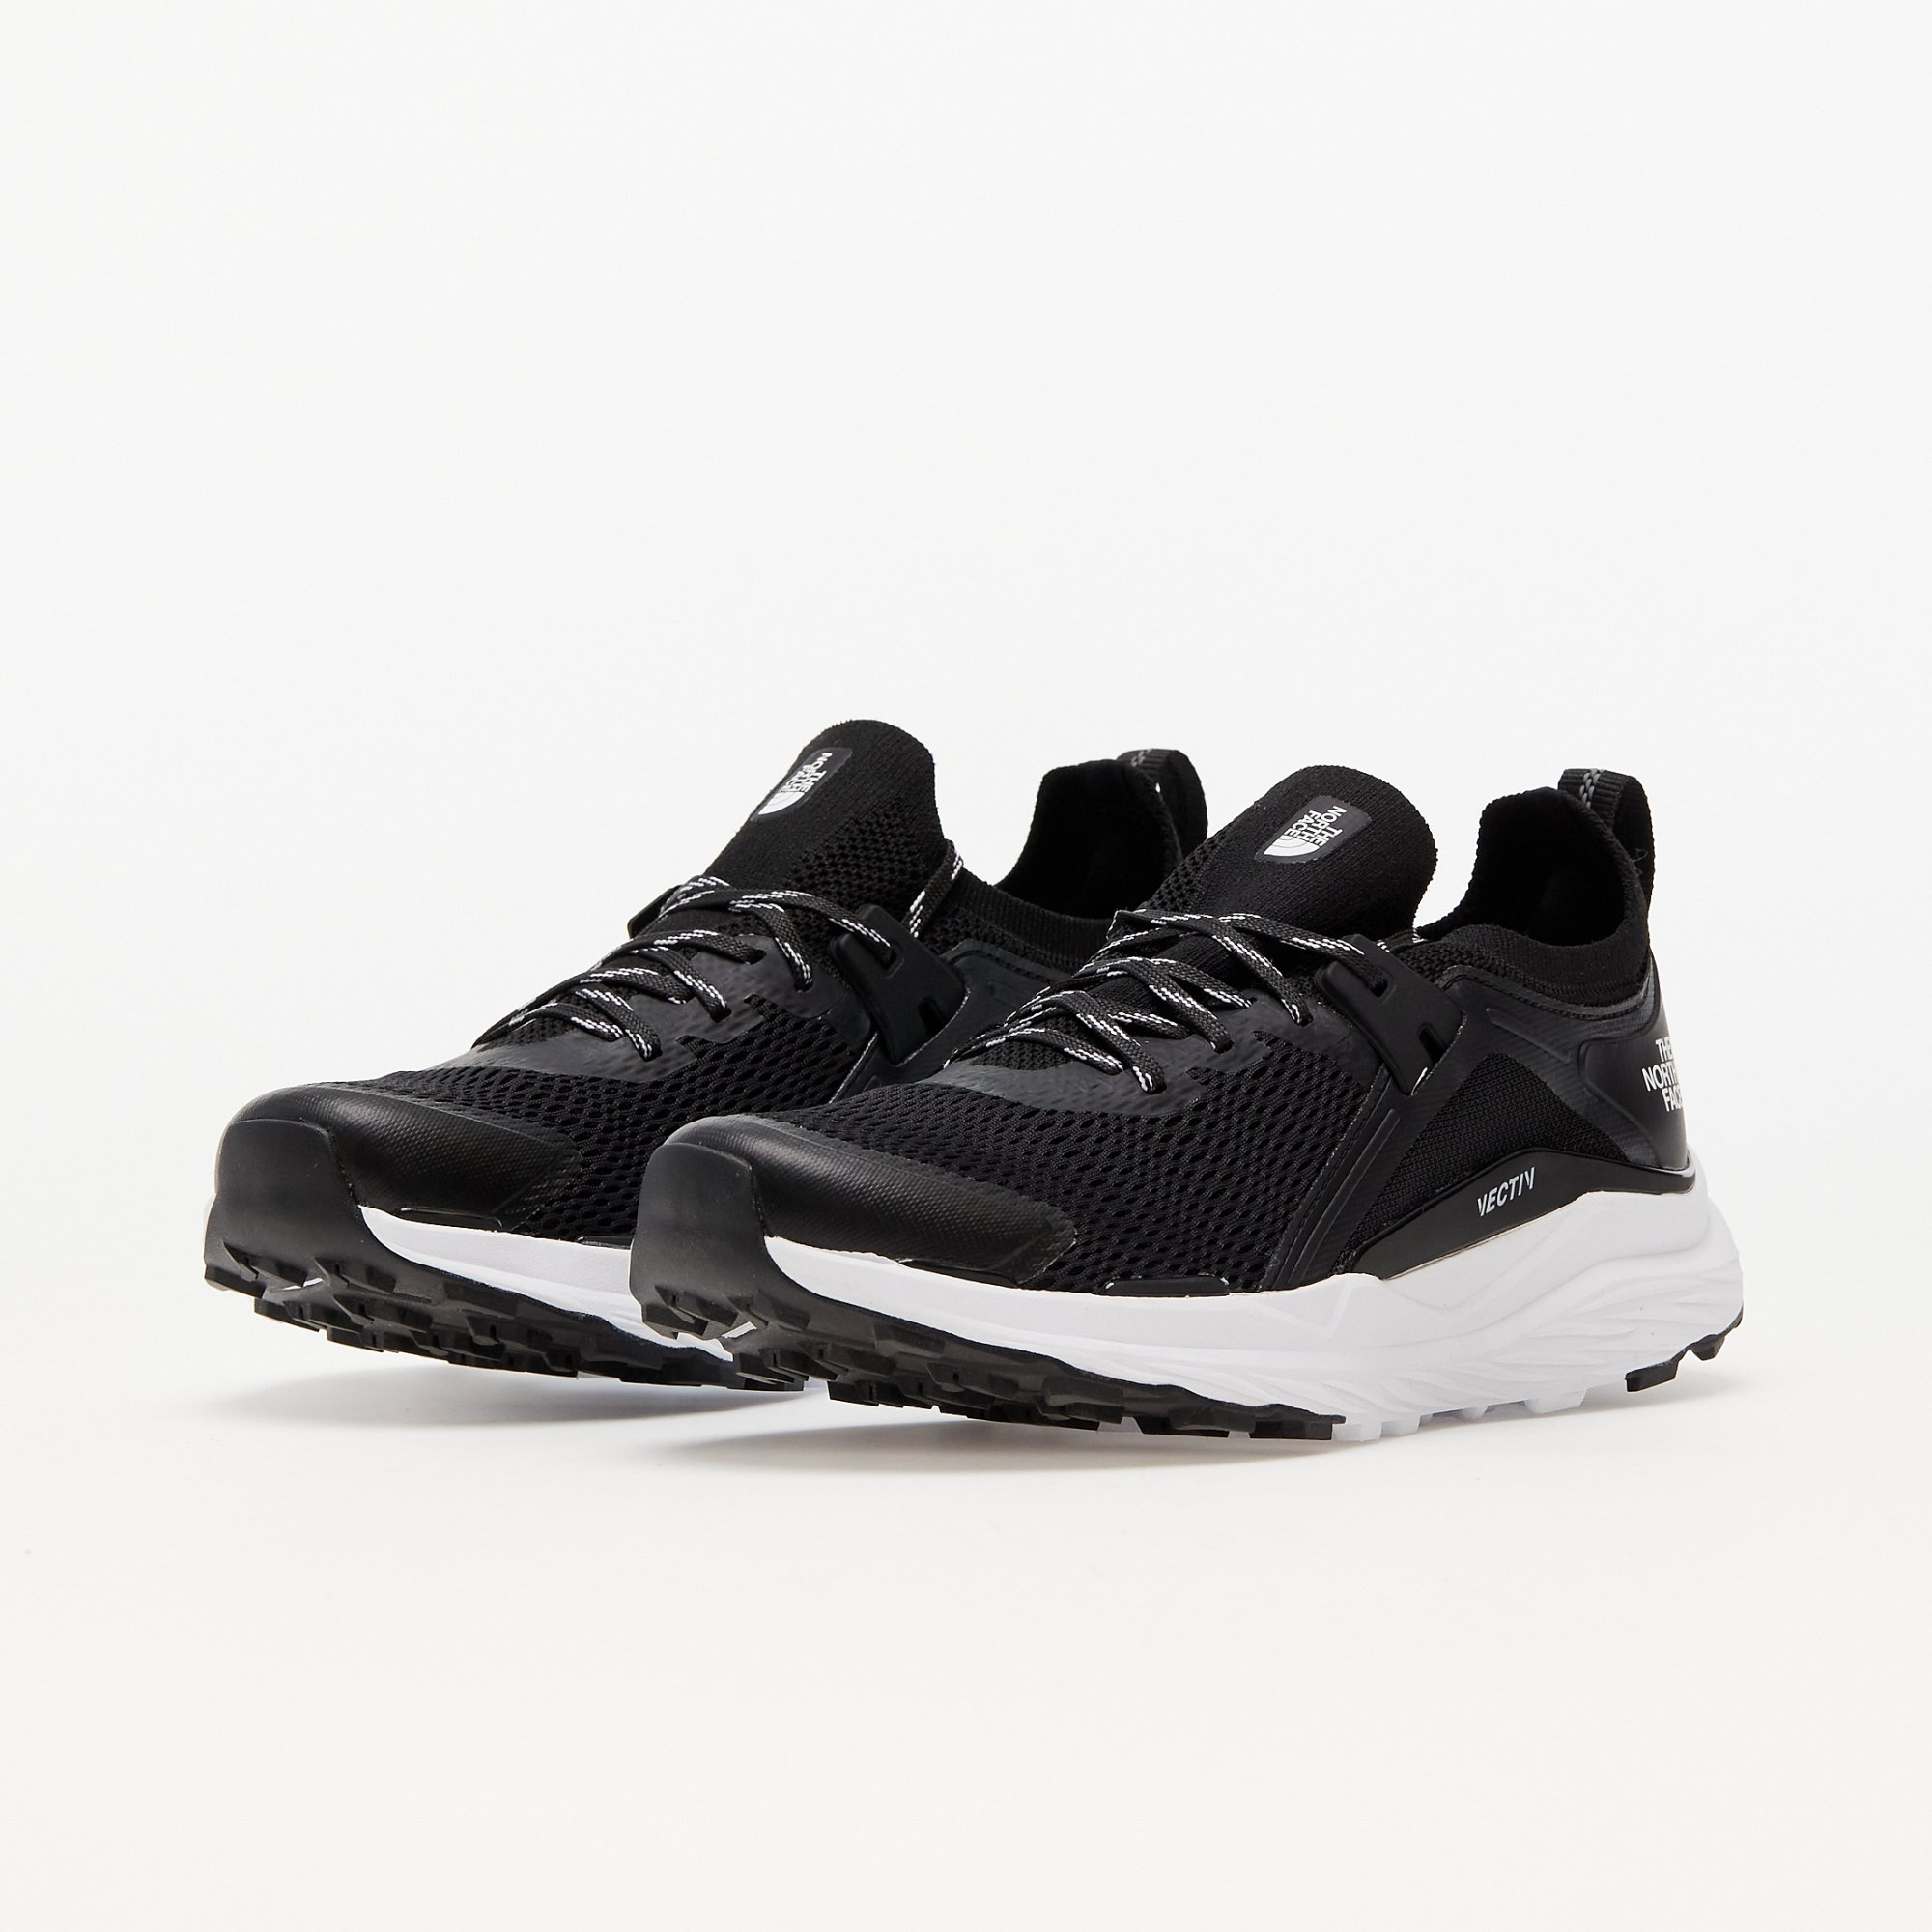 The North Face Vectiv Hypnum black / white The North Face